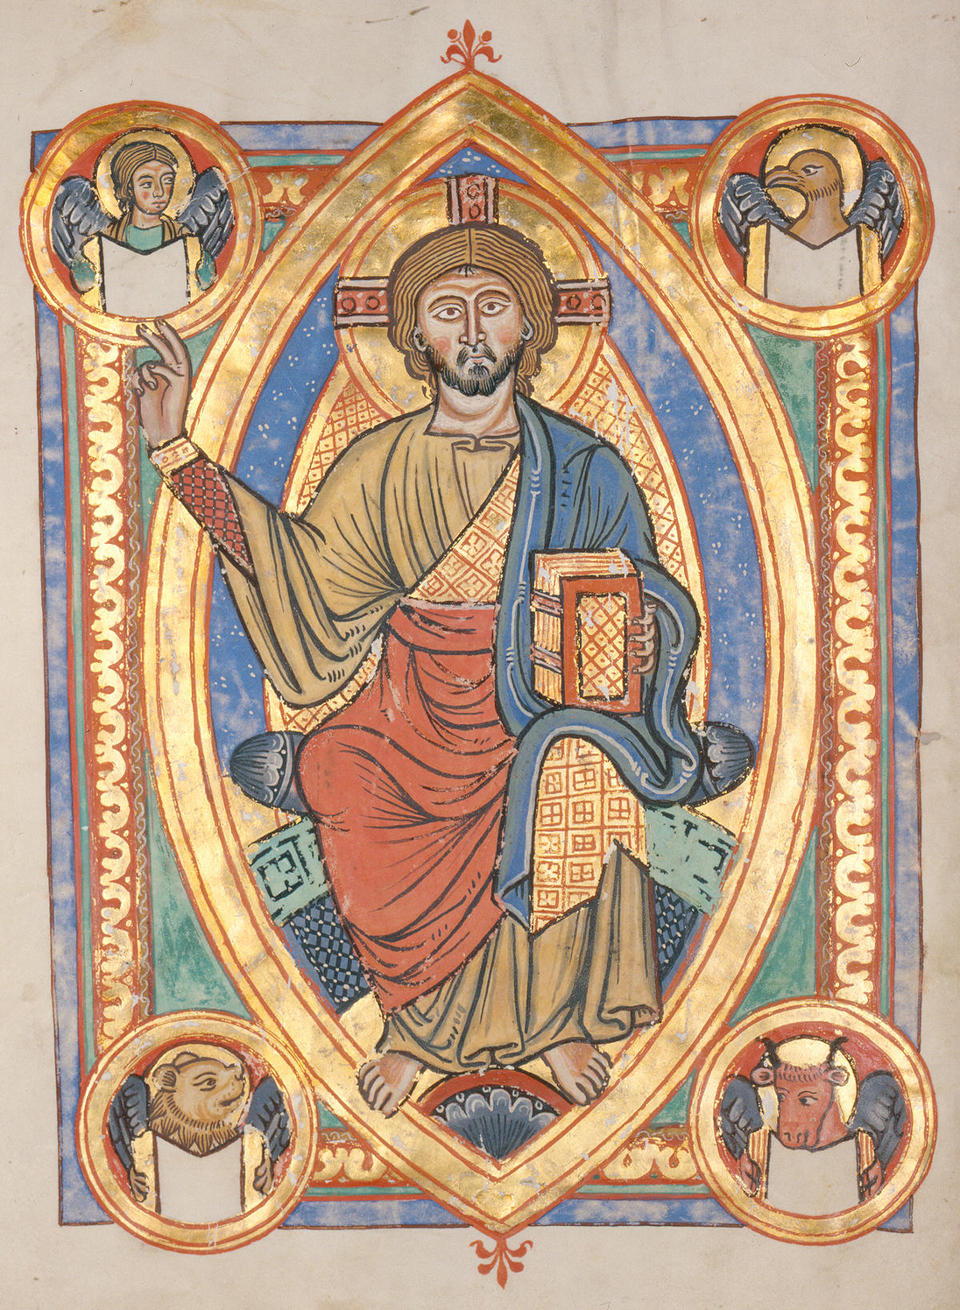 Christ in Majesty from the Codex Bruchsal